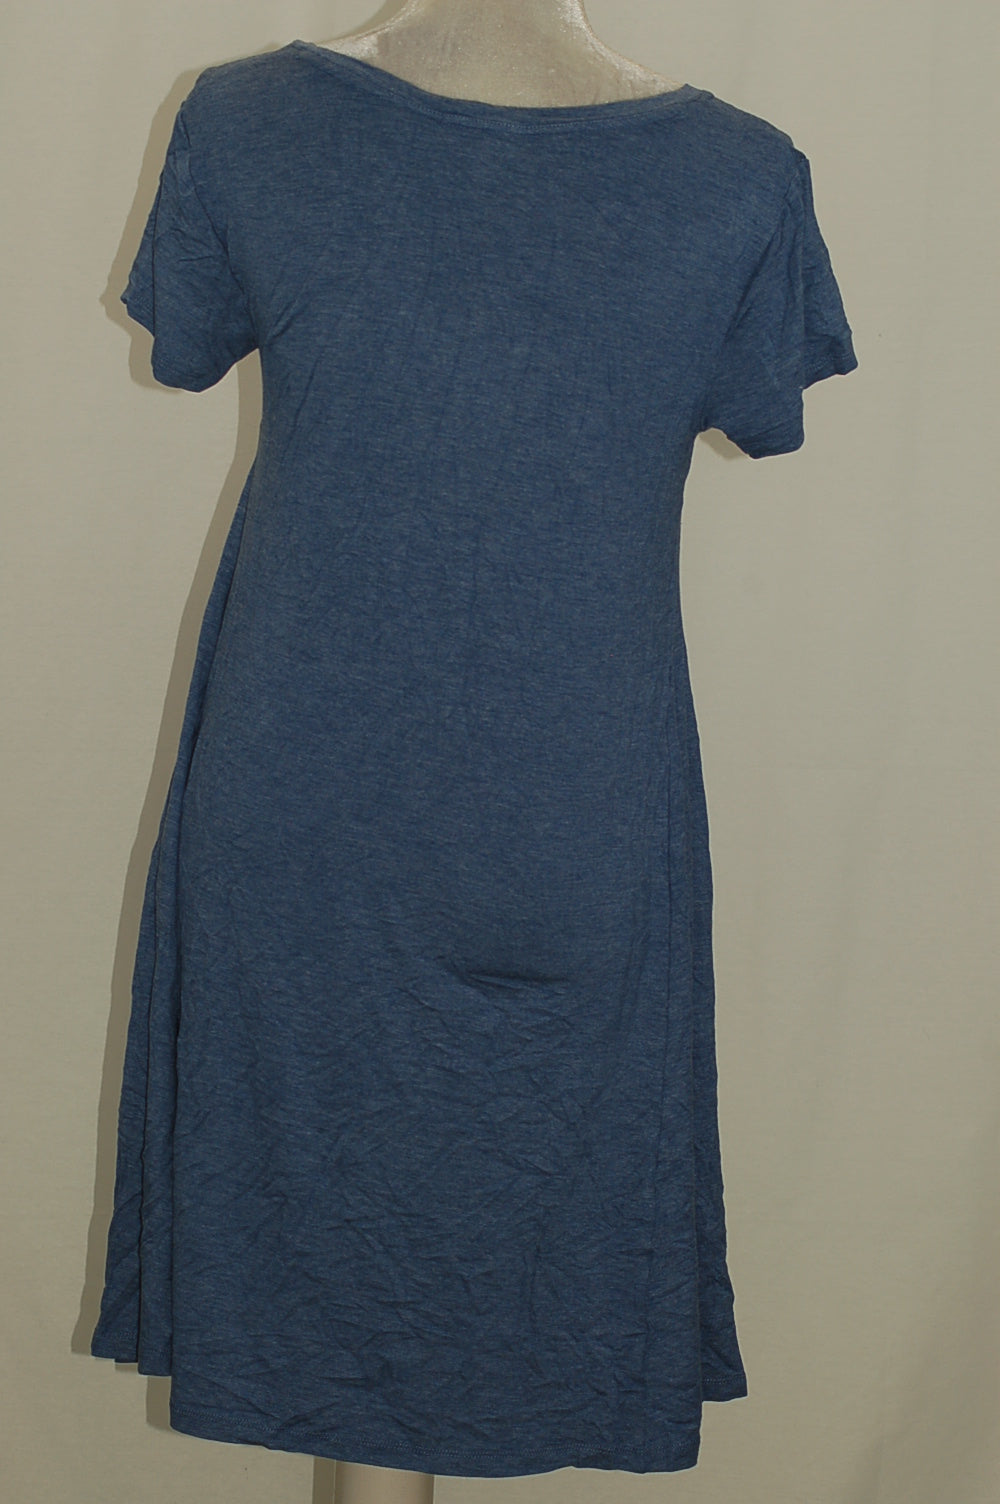 Style Co Short-Sleeve Casual Dress Carbon Blue Heather S